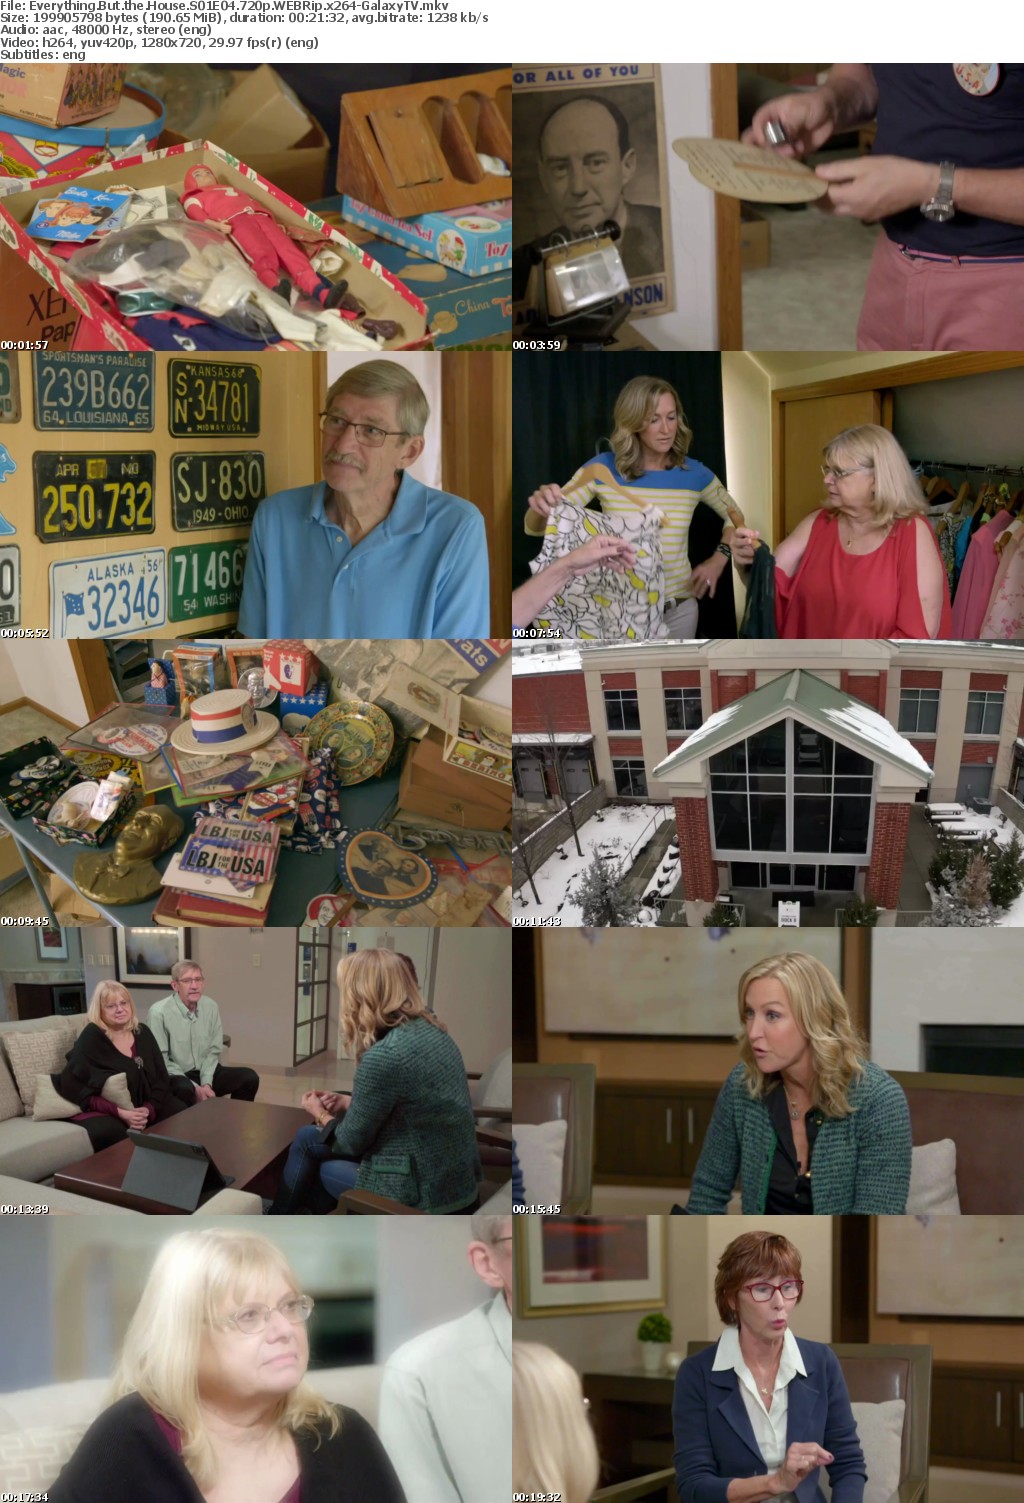 Everything But the House S01 COMPLETE 720p WEBRip x264-GalaxyTV